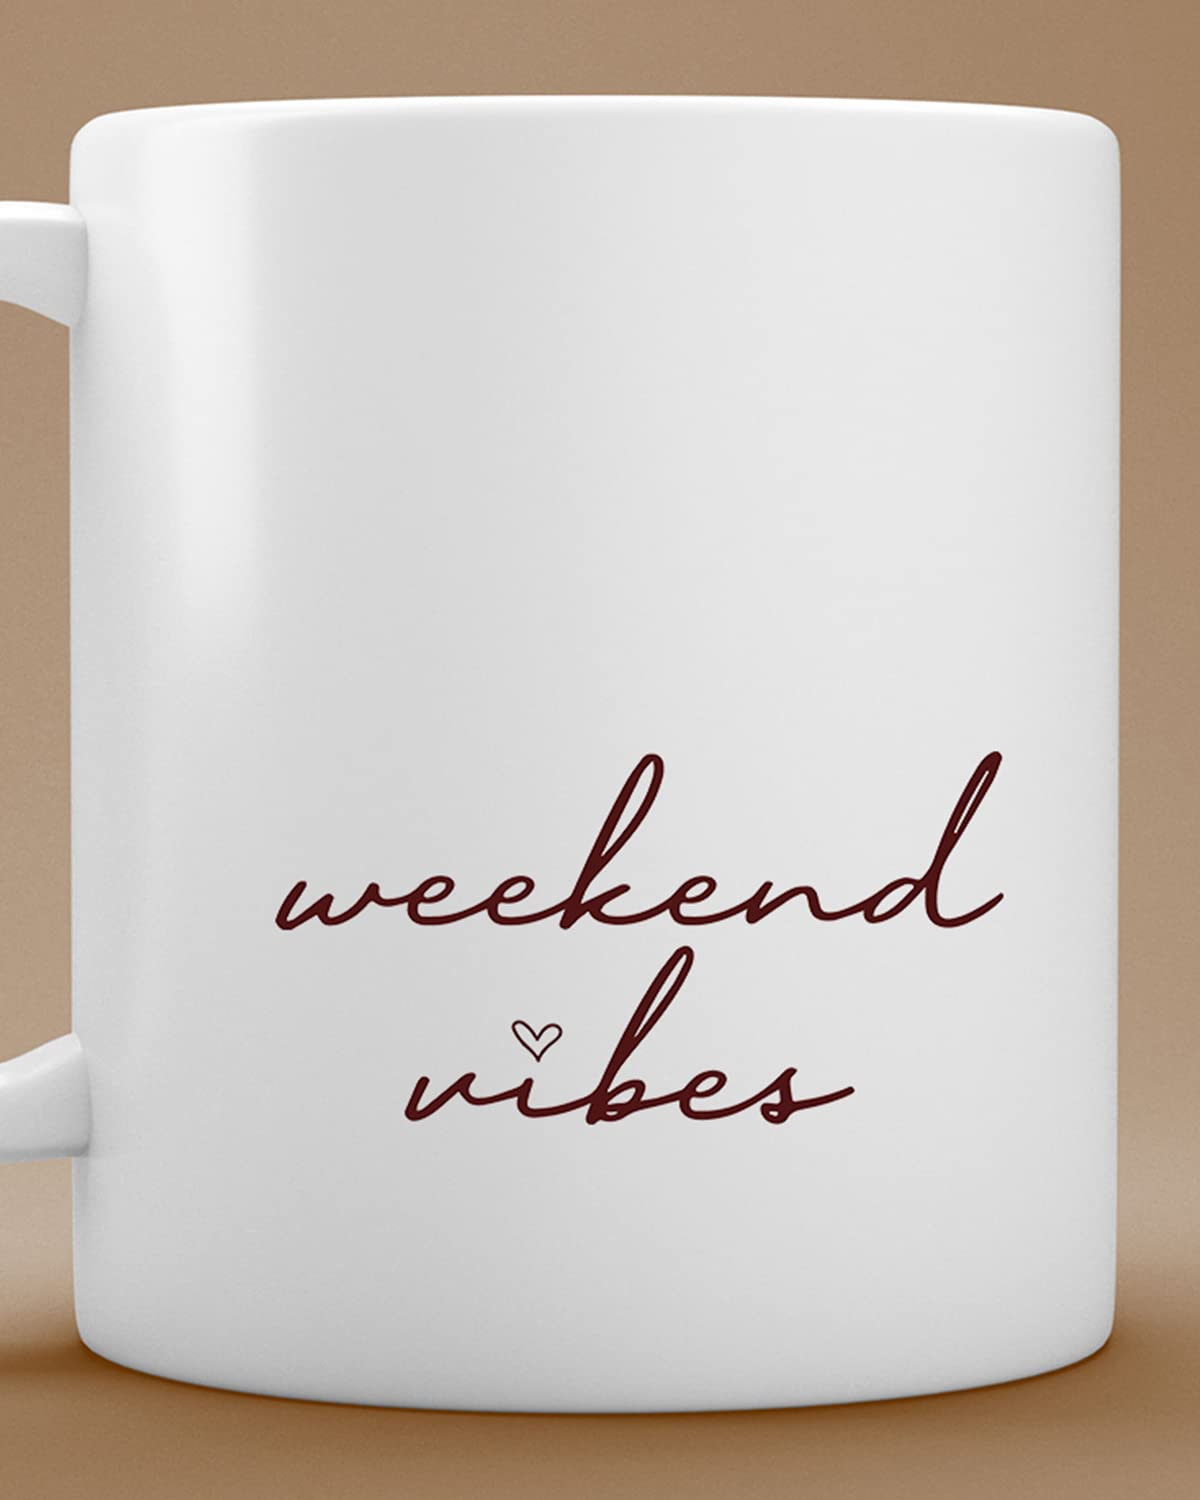 Weekend Vibes Coffee Mug | Romantic Printed Coffee Mug for Birthday,Anniversary Gift,Valentine's Day Gift, for Someone Special Inspirational thoughts | inspiring gifts for boyfriend | inspiring quotes Printed coffee mug(Ceramic) | coffee mu